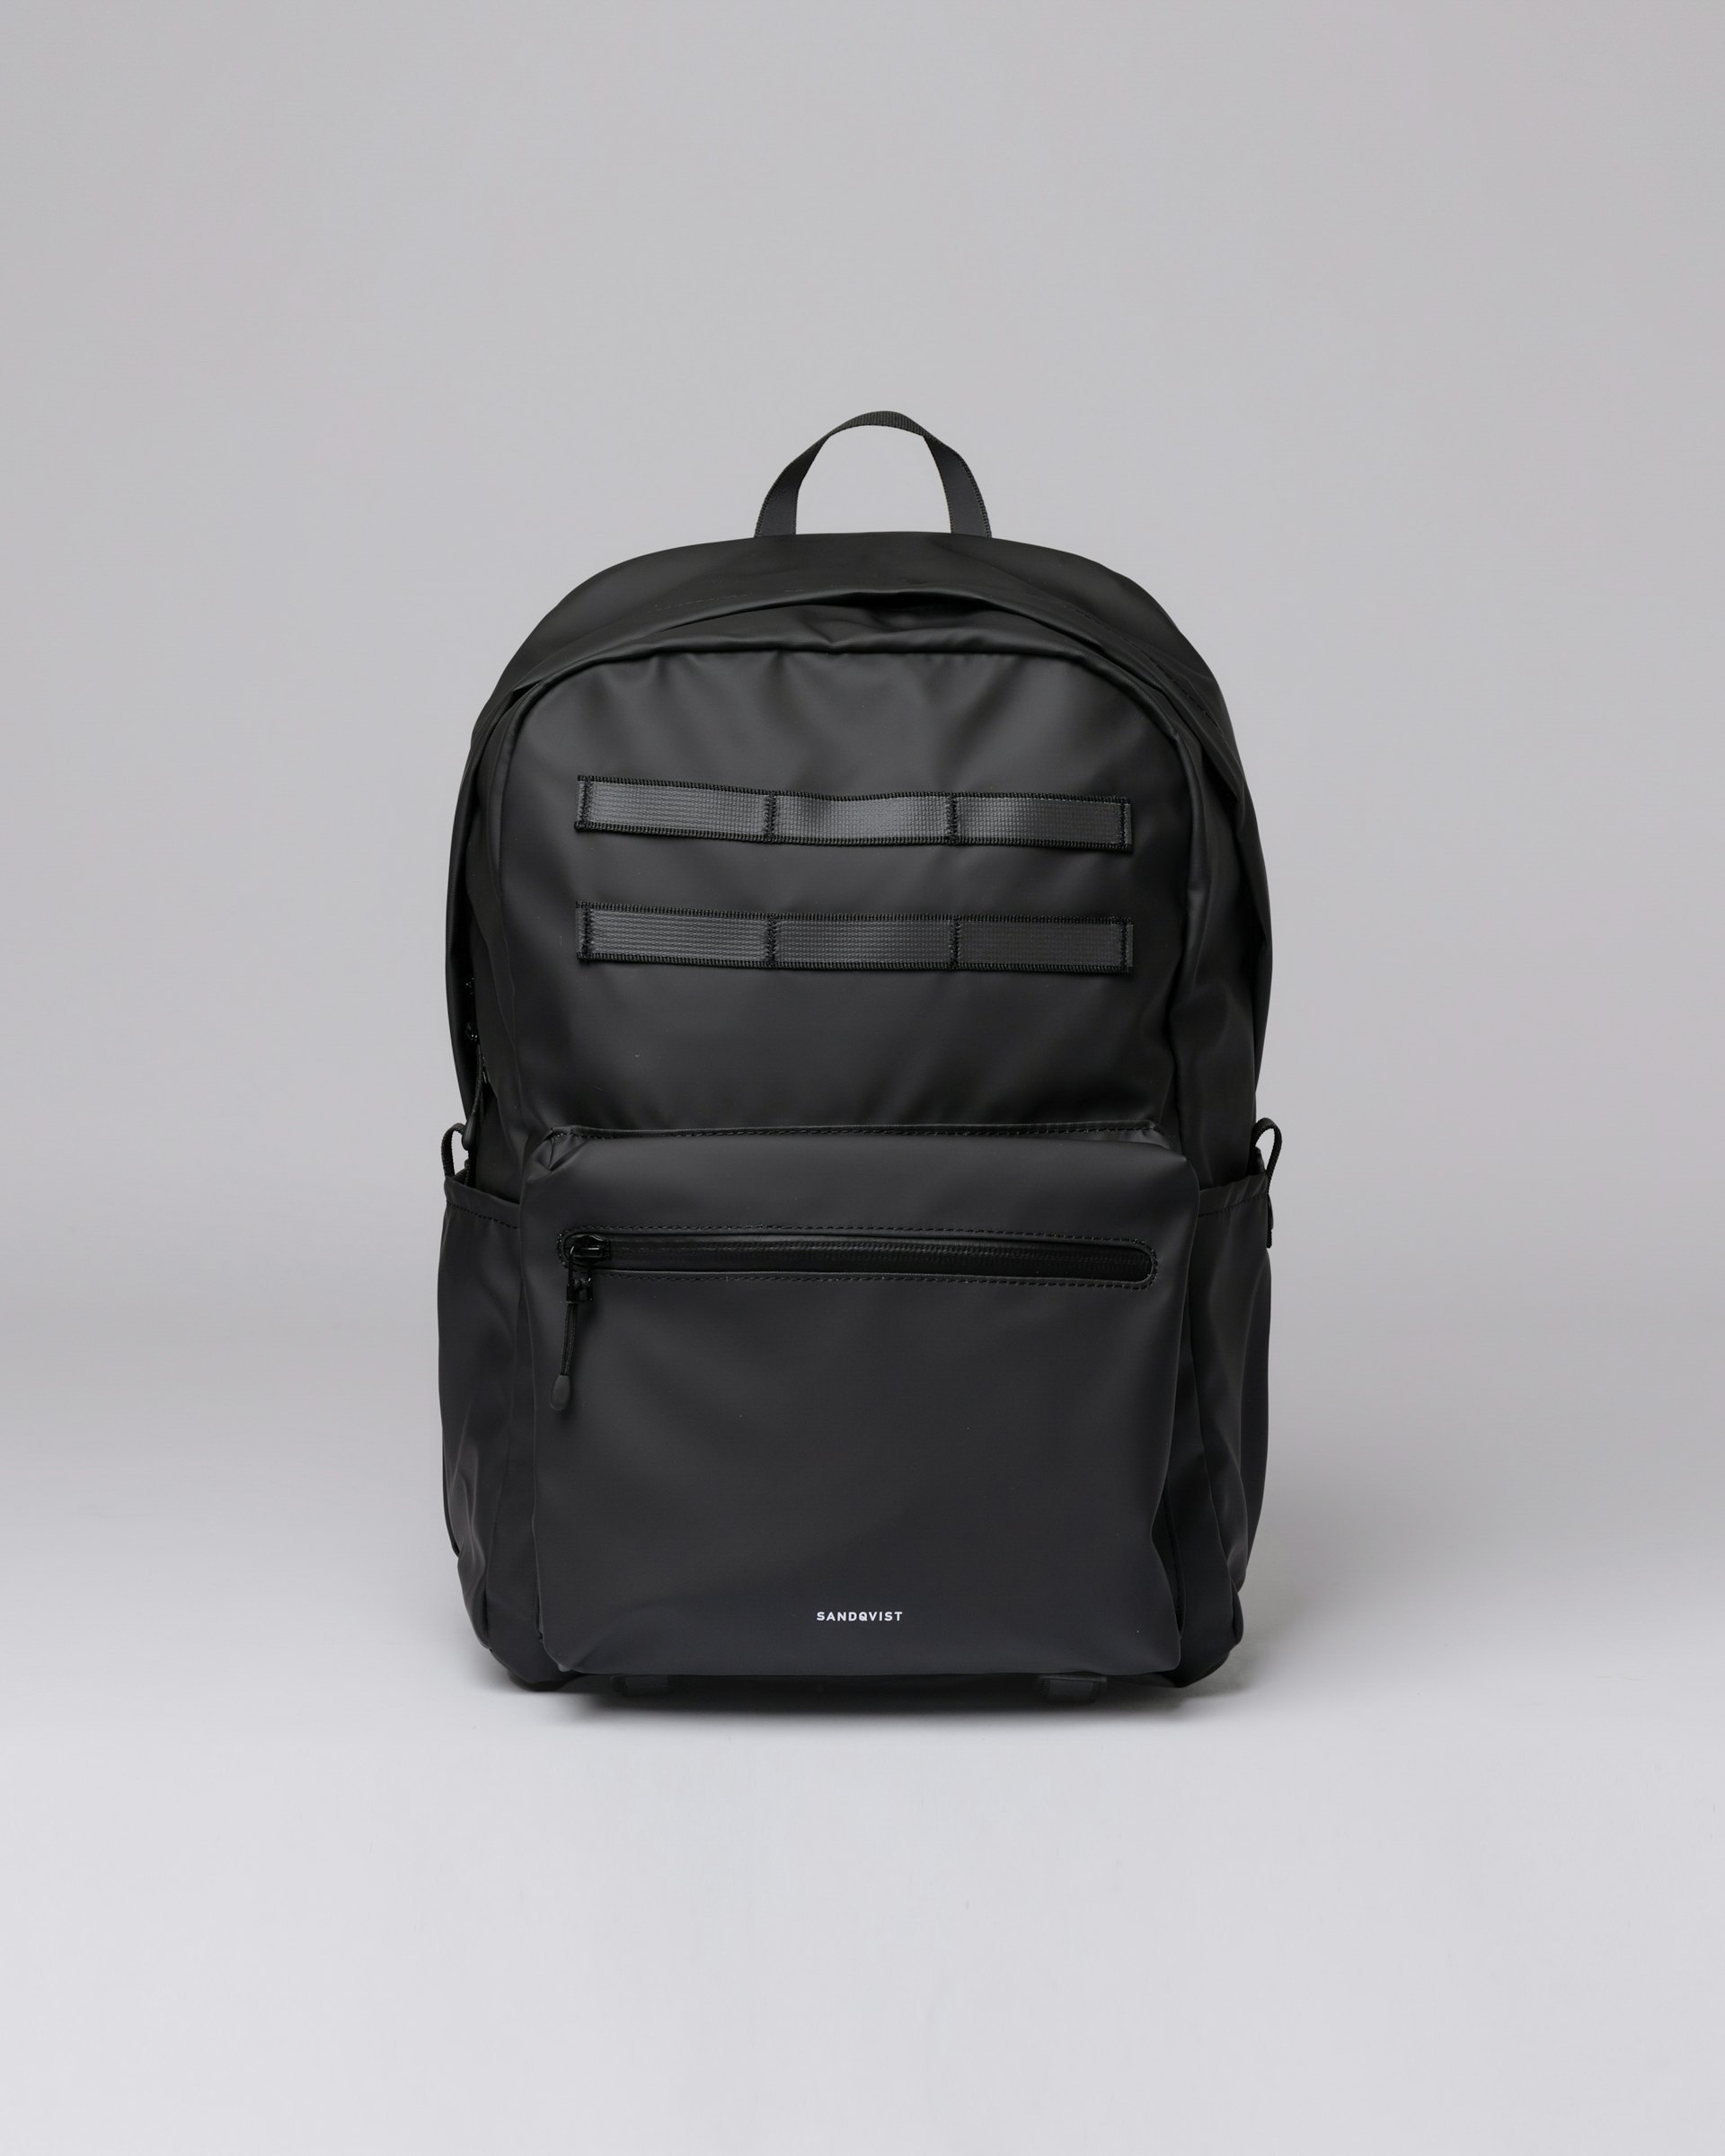 Alvar belongs to the category Backpacks and is in color black (1 of 6)